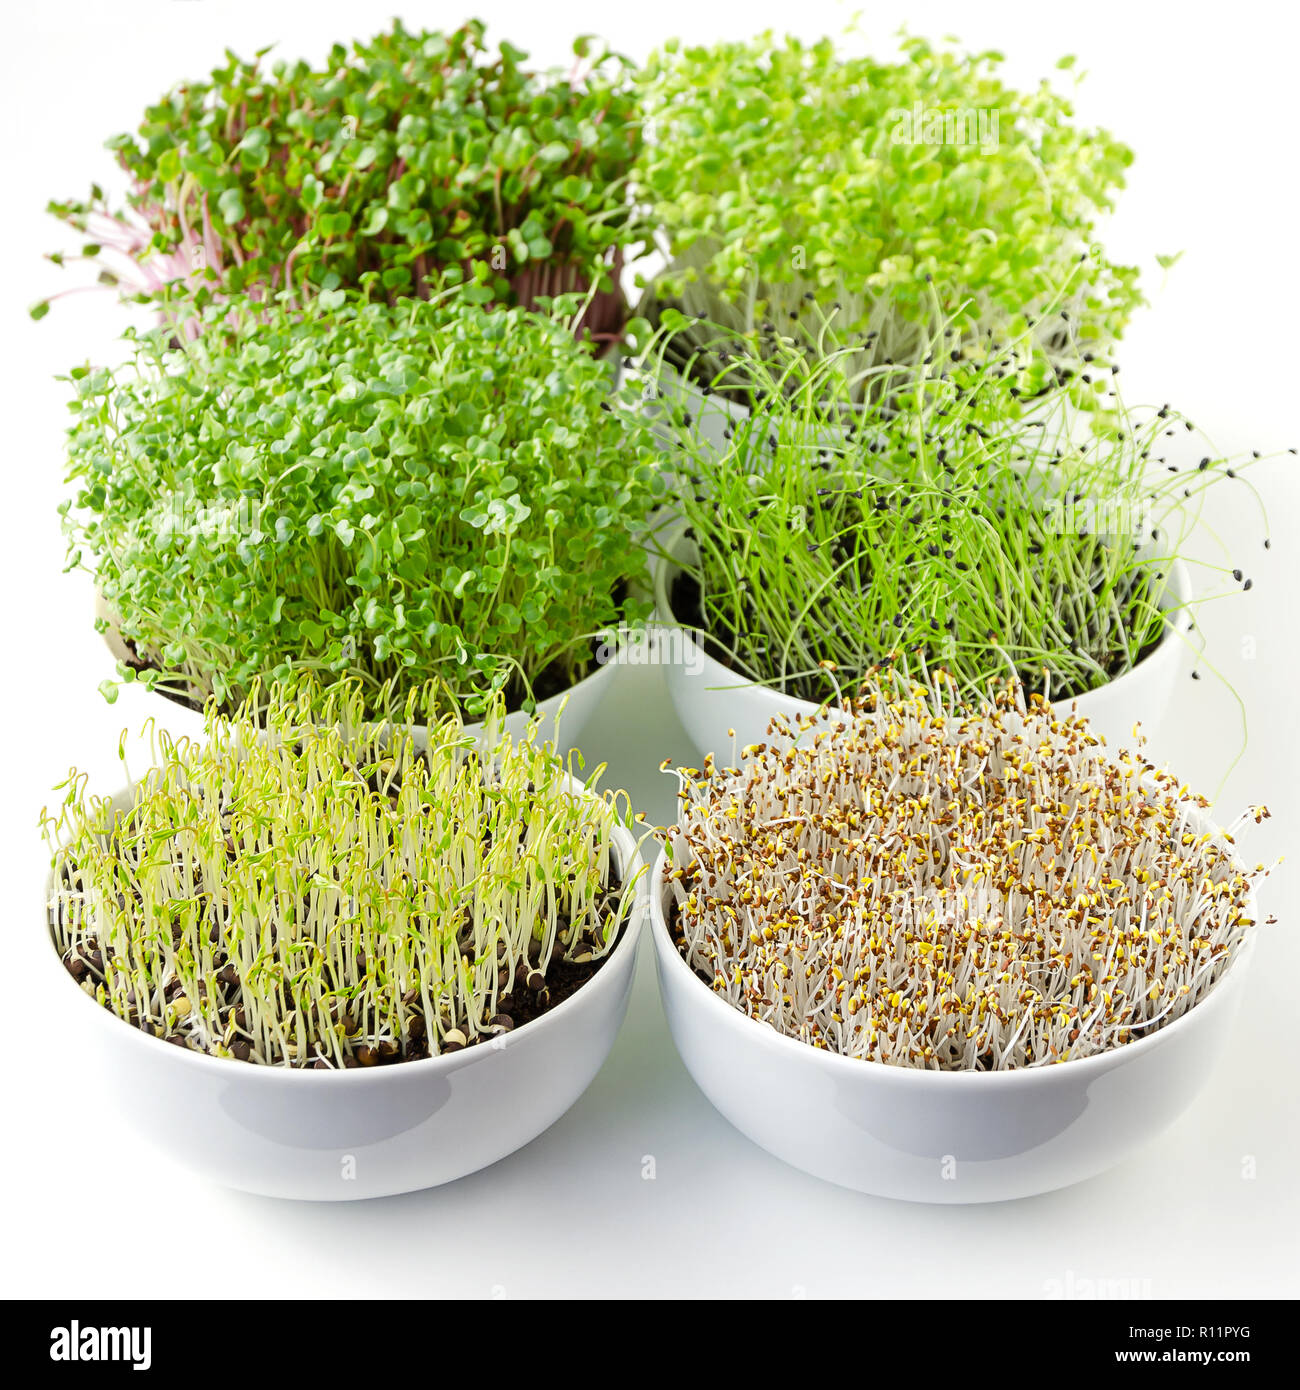 Microgreens sprouting in white bowls, vertical. Shoots of radish, Chinese cabbage, kale, garlic, lentils and alfalfa in potting compost. Sprouts. Stock Photo